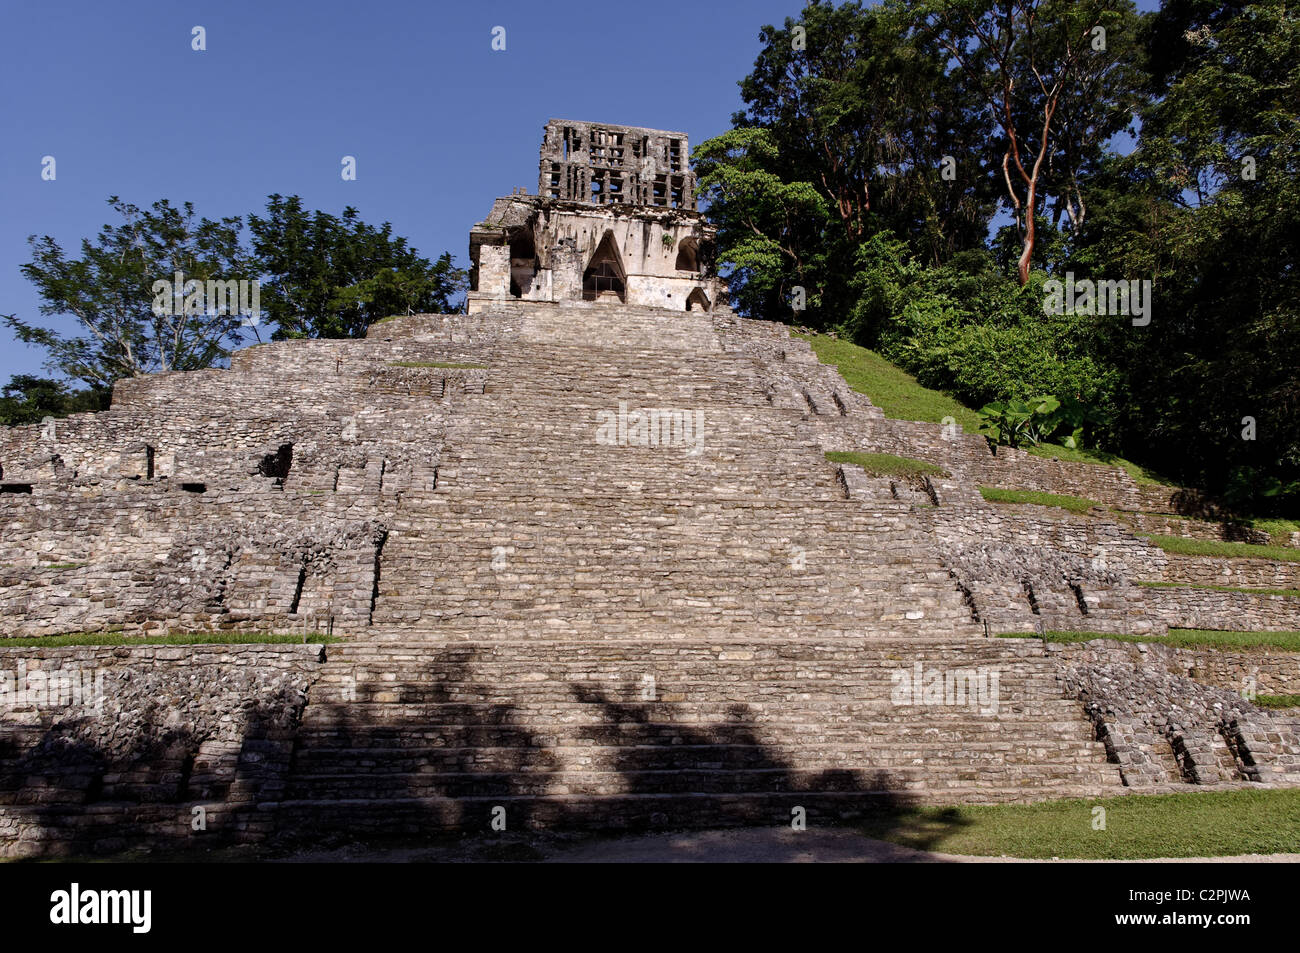 Temple of the Cross in Palenque, Chiapas, Mexico Stock Photo